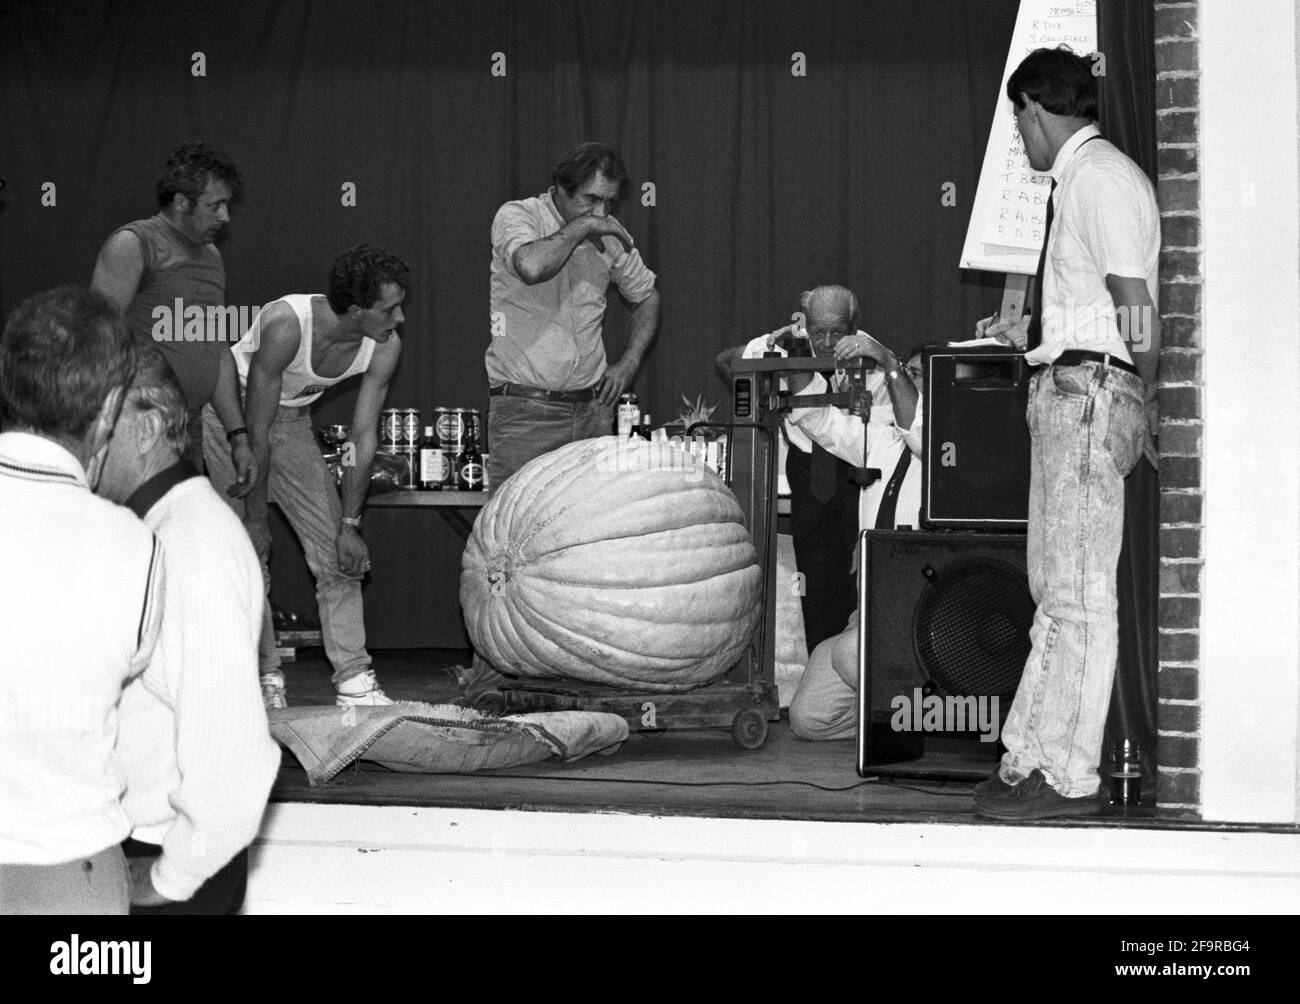 A giant marrow is finally lifted on to the scales to be weighed during the annual competition at Broughton Village Hall, Hampshire. UK Circa 1995. Stock Photo